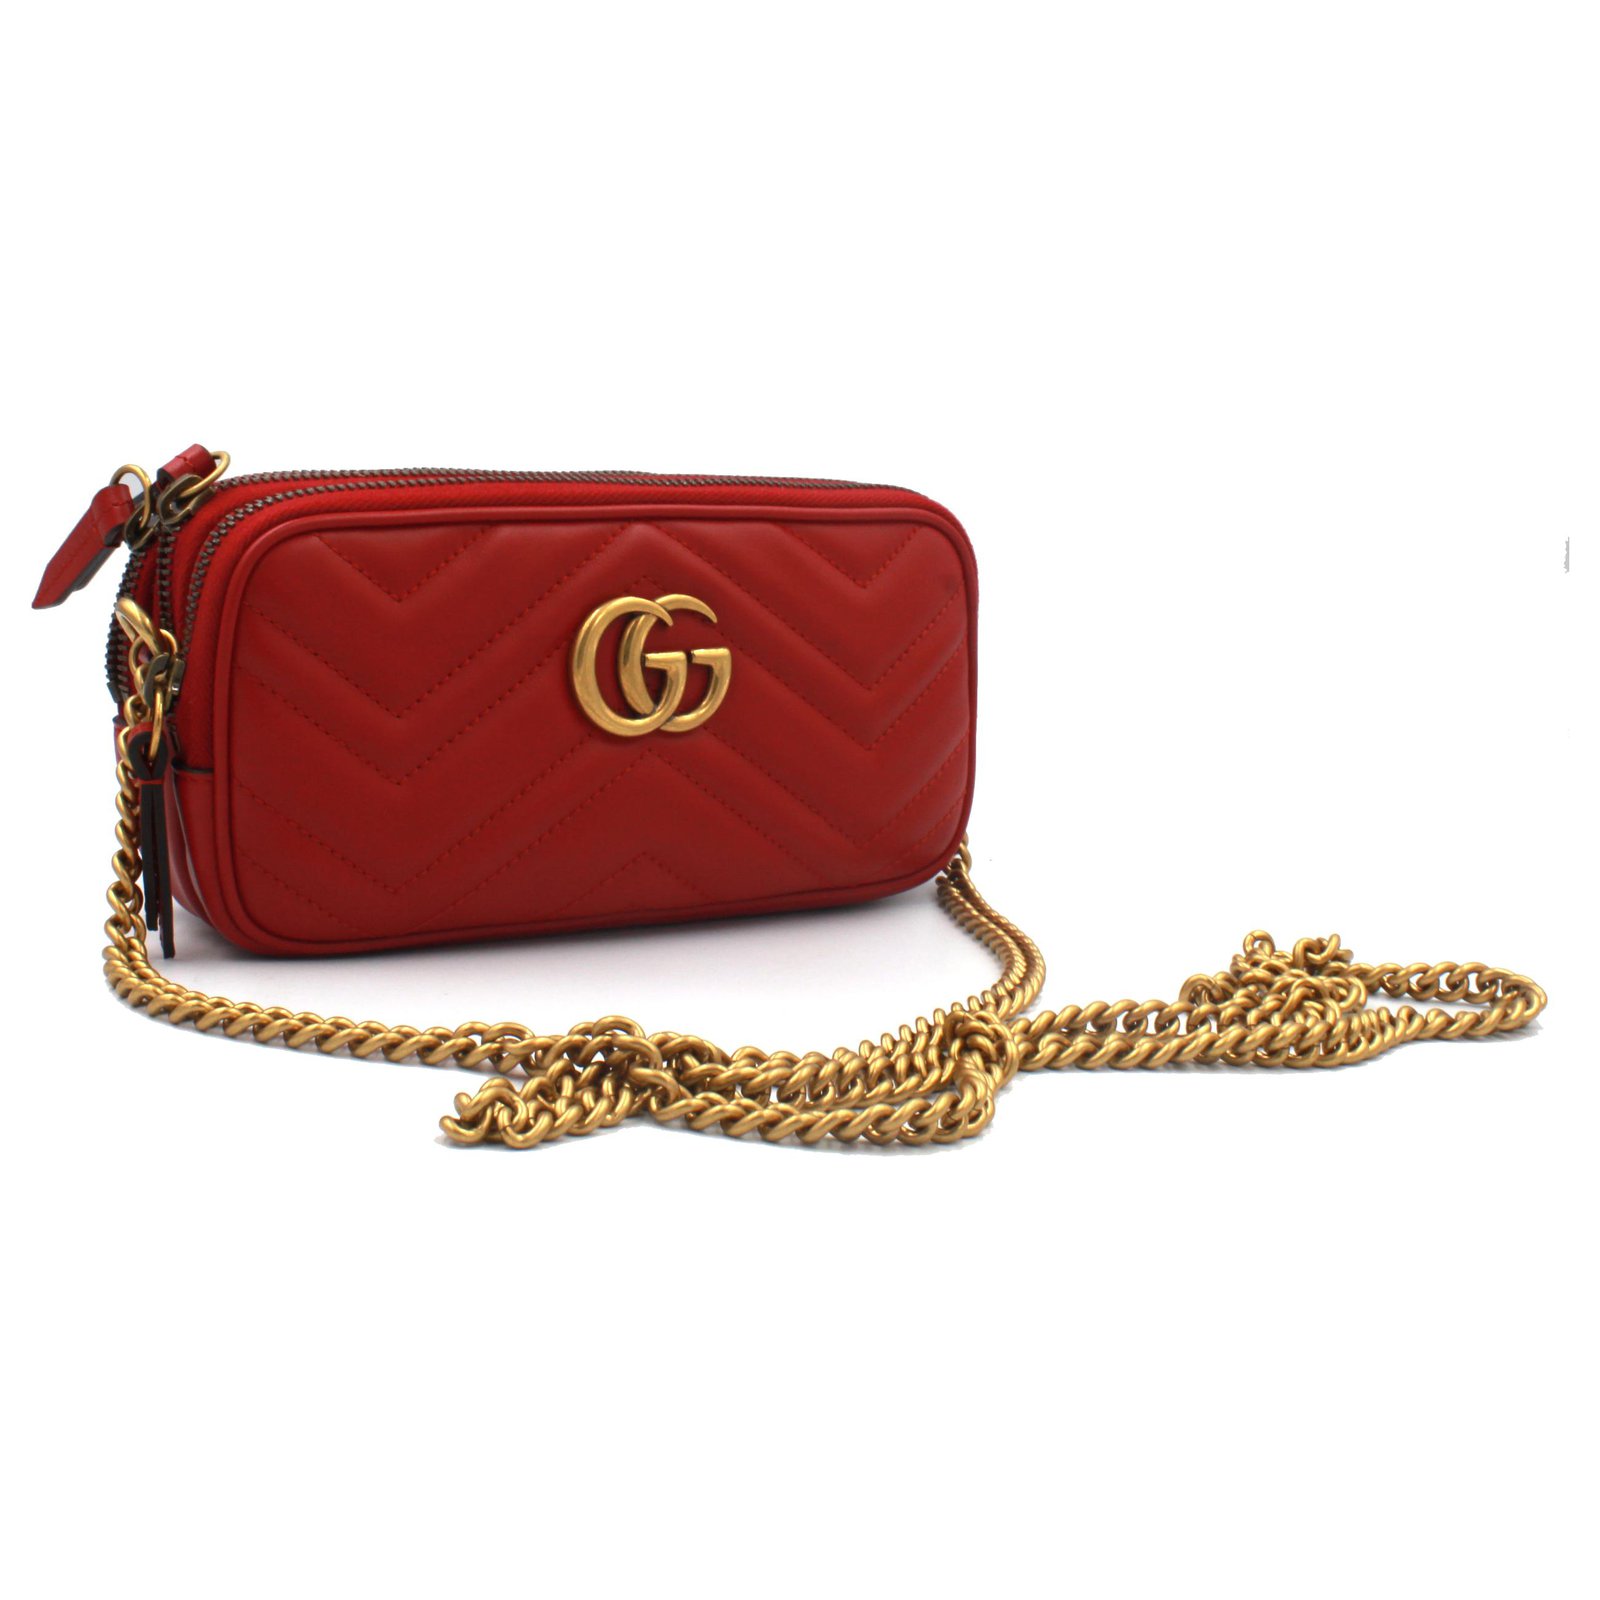 red marmont gucci bag